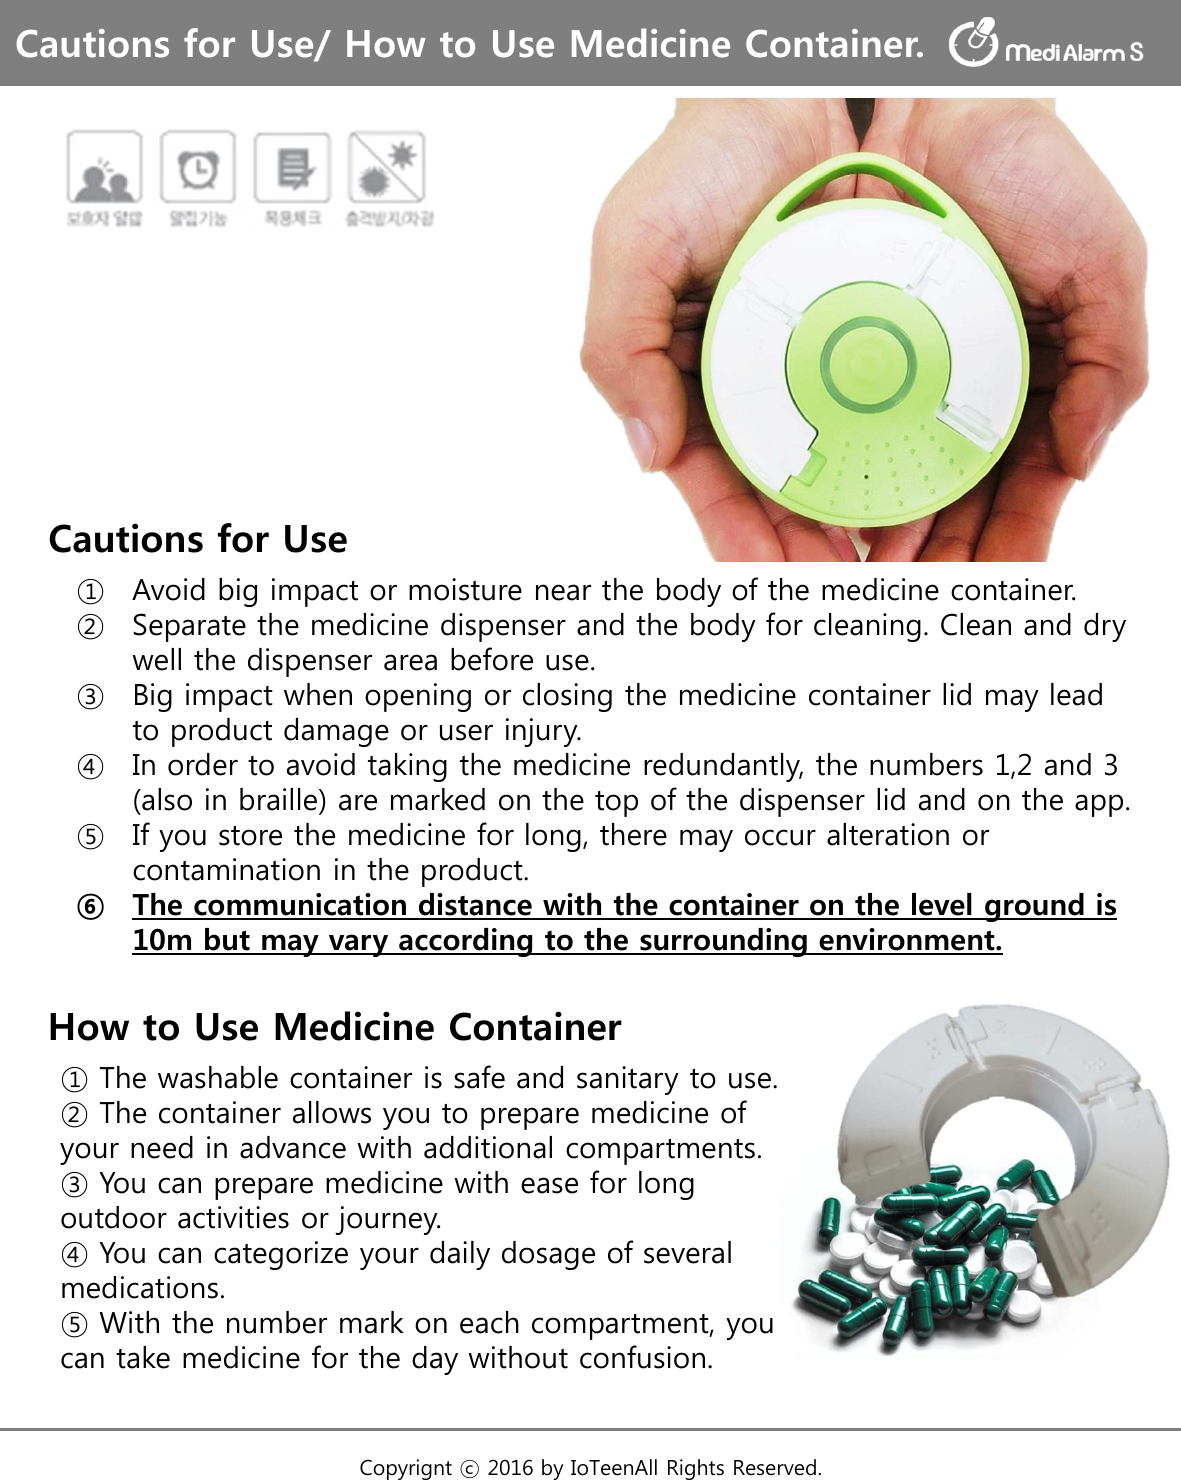 Cautions for Use① Avoid big impact or moisture near the body of the medicine container.② Separate the medicine dispenser and the body for cleaning. Clean and dry well the dispenser area before use.③ Big impact when opening or closing the medicine container lid may lead to product damage or user injury.④ In order to avoid taking the medicine redundantly, the numbers 1,2 and 3 (also in braille) are marked on the top of the dispenser lid and on the app. ⑤ If you store the medicine for long, there may occur alteration or contamination in the product. ⑥ The communication distance with the container on the level ground is 10m but may vary according to the surrounding environment.Cautions for Use/ How to Use Medicine Container.Copyrignt ⓒ 2016 by IoTeenAll Rights Reserved. How to Use Medicine Container① The washable container is safe and sanitary to use.② The container allows you to prepare medicine of your need in advance with additional compartments.③ You can prepare medicine with ease for long outdoor activities or journey.④ You can categorize your daily dosage of several medications.⑤ With the number mark on each compartment, you can take medicine for the day without confusion.